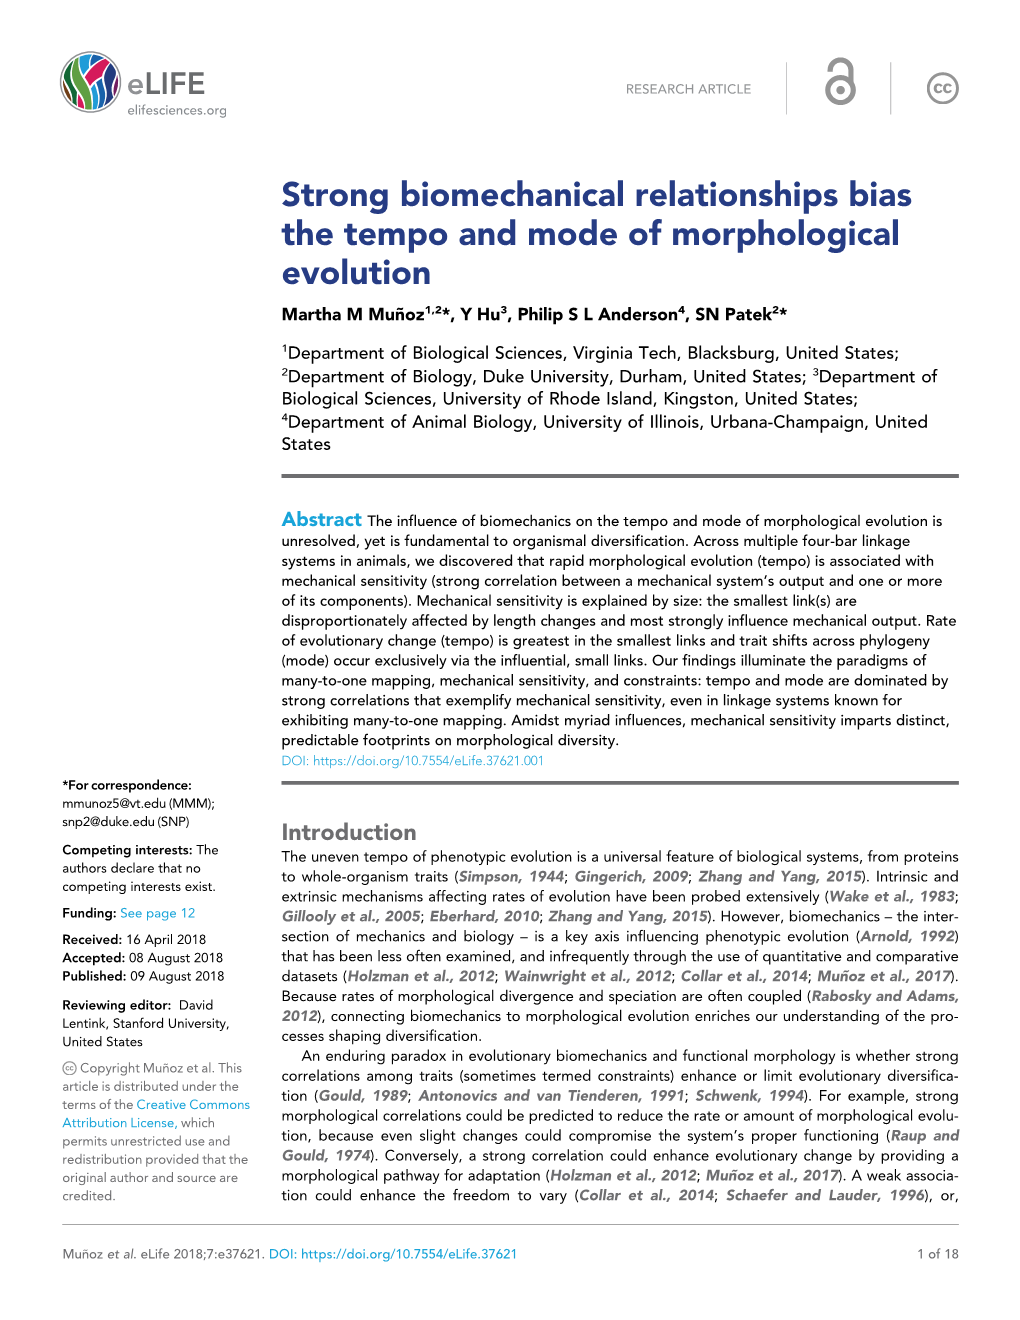 Strong Biomechanical Relationships Bias the Tempo and Mode of Morphological Evolution Martha M Mun˜ Oz1,2*, Y Hu3, Philip S L Anderson4, SN Patek2*